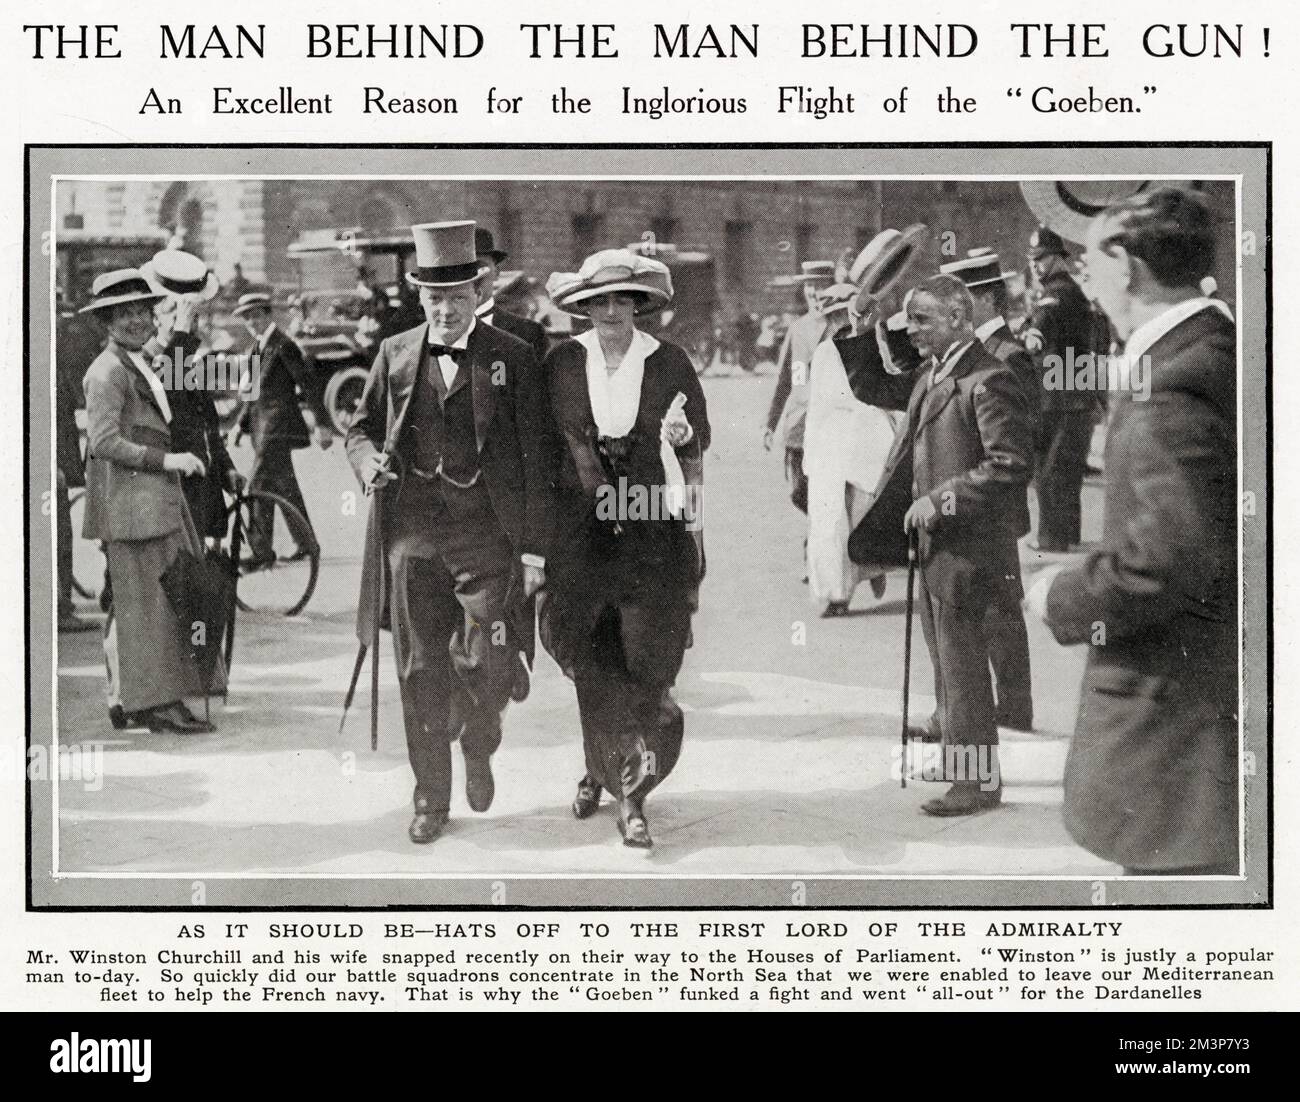 Winston Churchill, First Lord of the Admiralty during the first two years of the First World War, pictured with his wife, Clementine on their way to the Houses of Parliament, with onlookers raising their hats as a sign of admiration.  This is before of course, he was blamed and castigated for his decision-making over the disastrous Dardanelles campaign the following year. Stock Photo